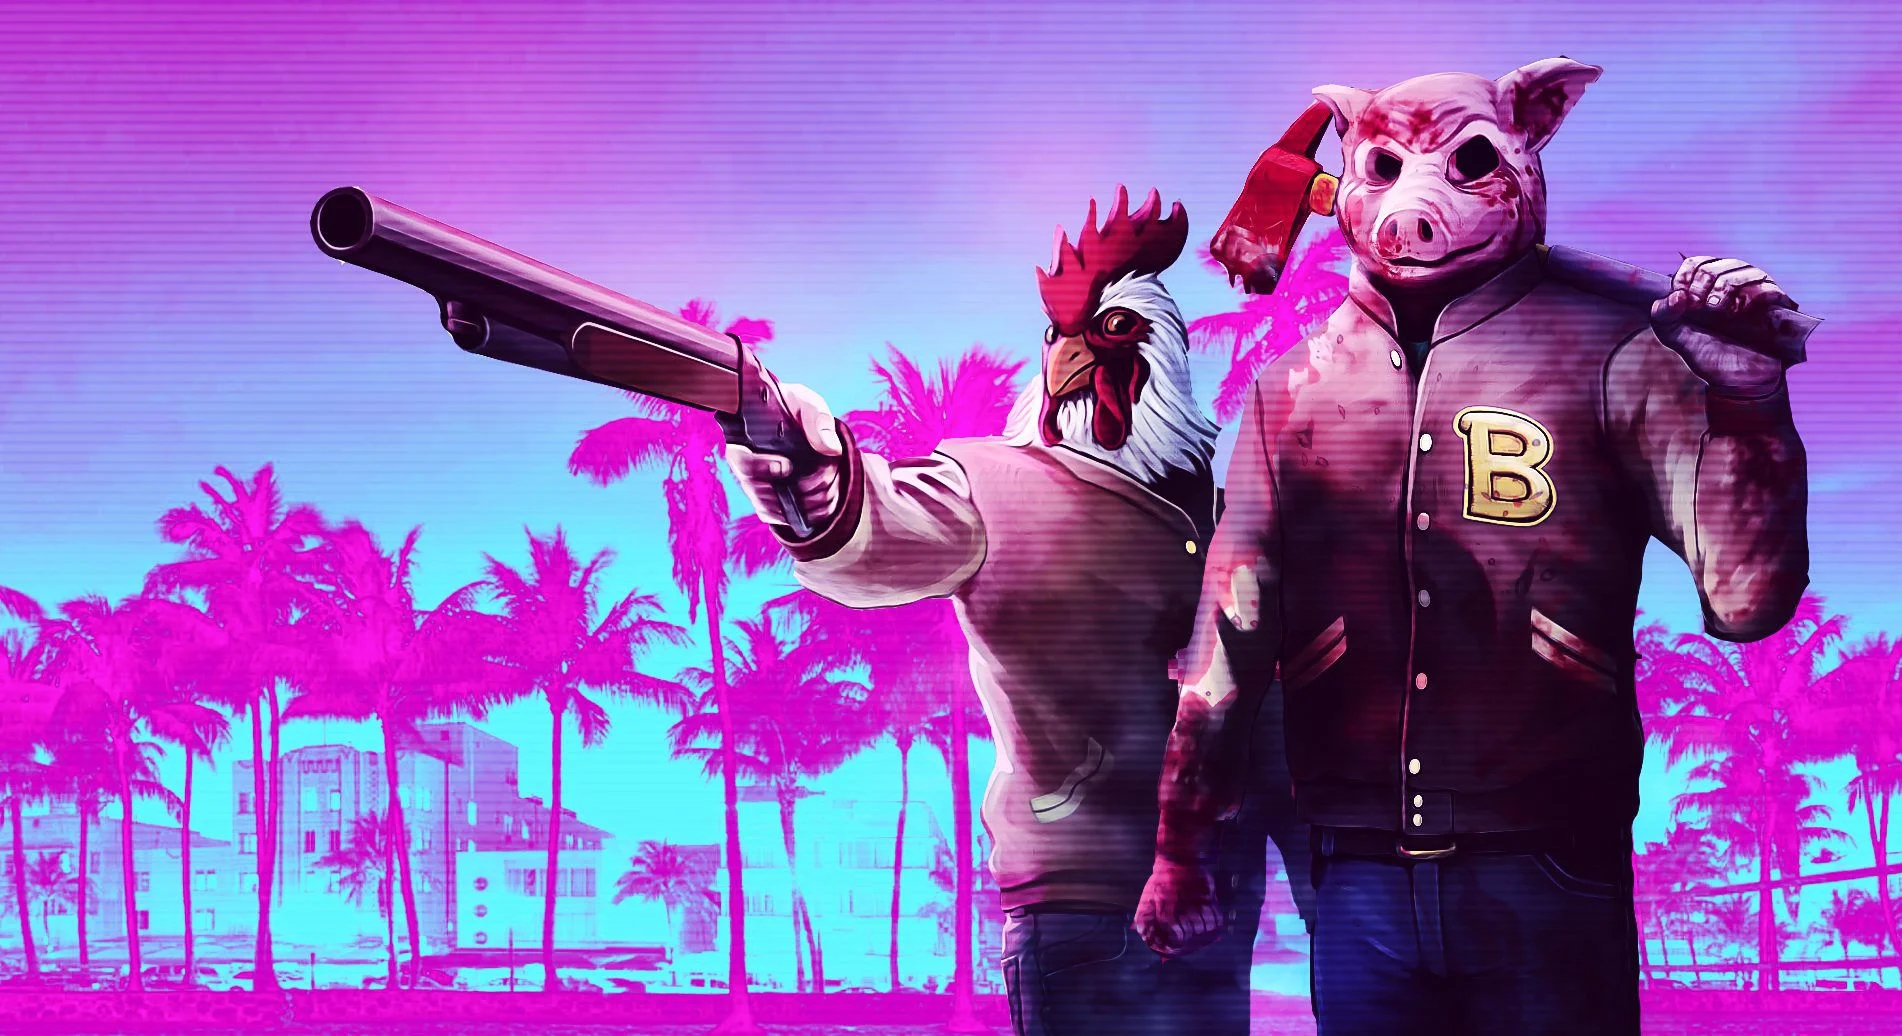 Hotline Miami 1&2 is now available for PS5 and Xbox Series